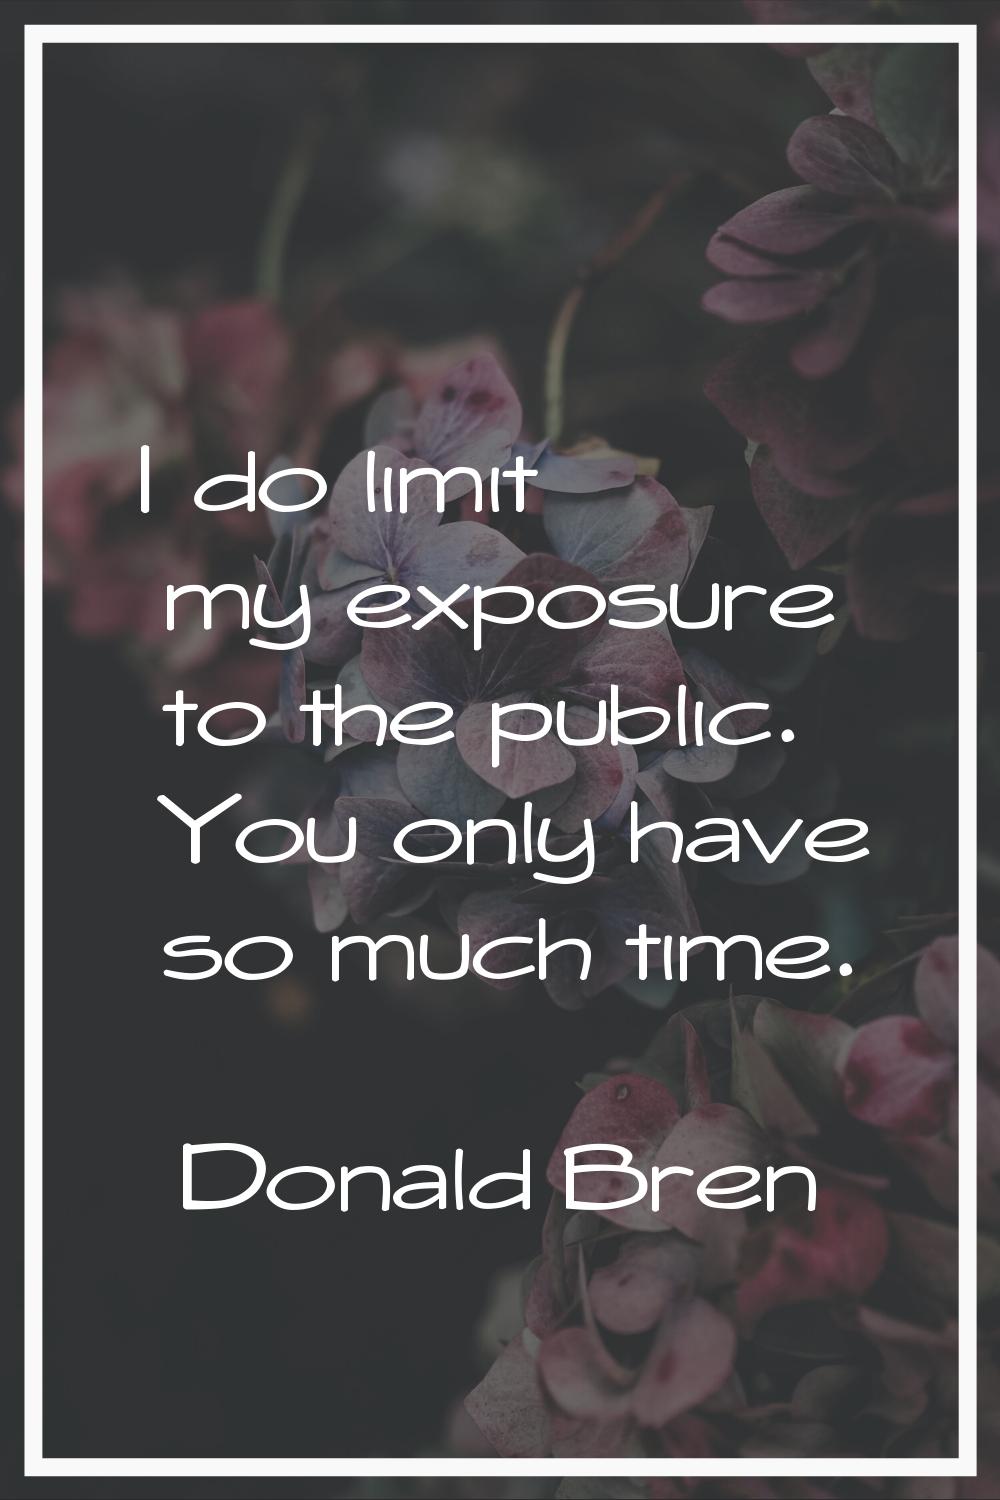 I do limit my exposure to the public. You only have so much time.